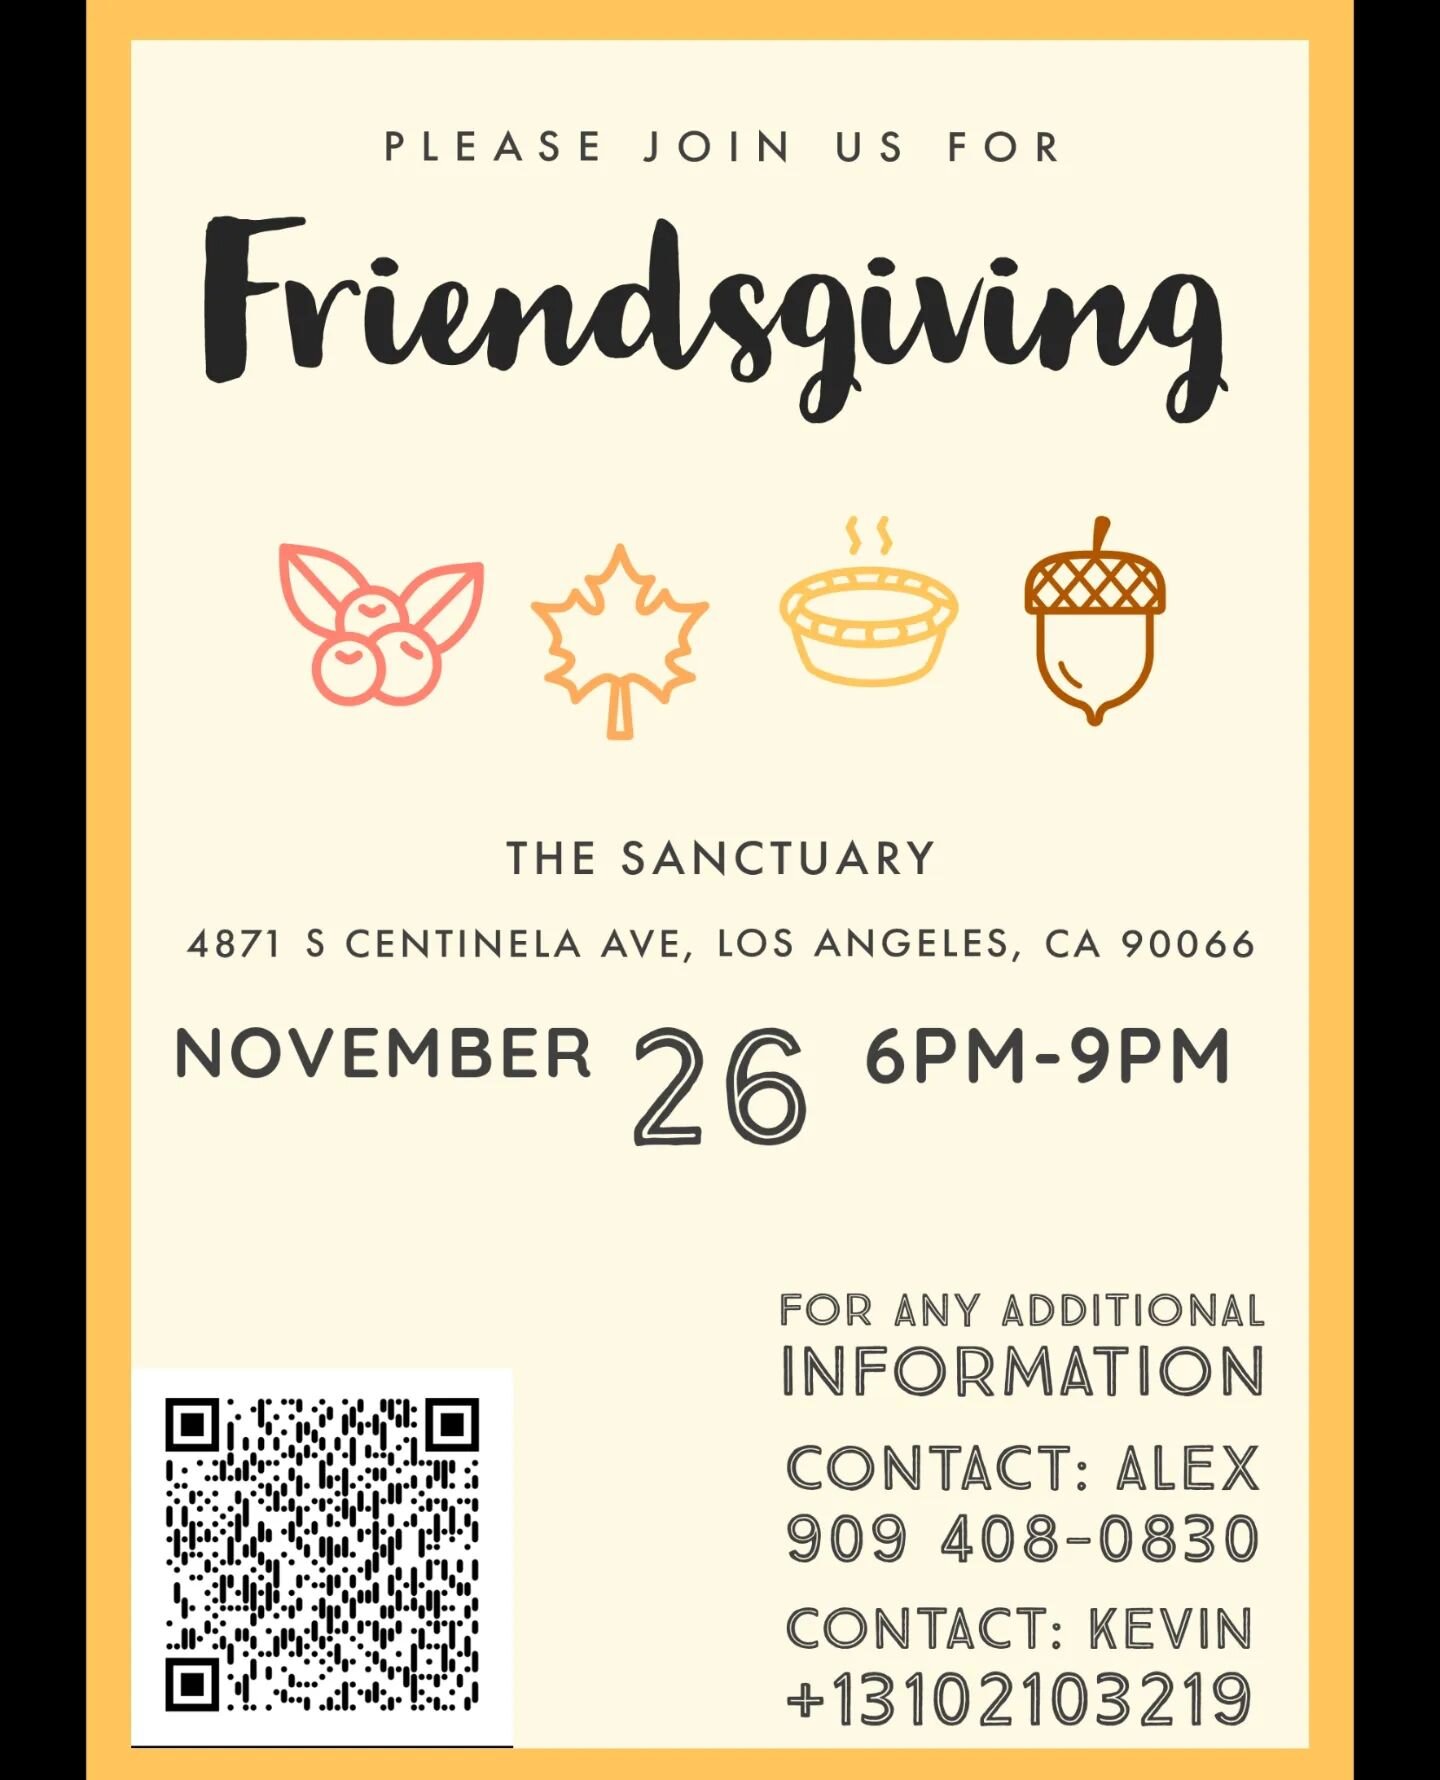 Hey yall! It's that time again ! Our friendsgiving is this Saturday Nov 26th in the sanctuary! This year is going to be great! We won't just have young adults but also our Venice Youth Group (Pulse)! We are so excited to be able to break bread and to